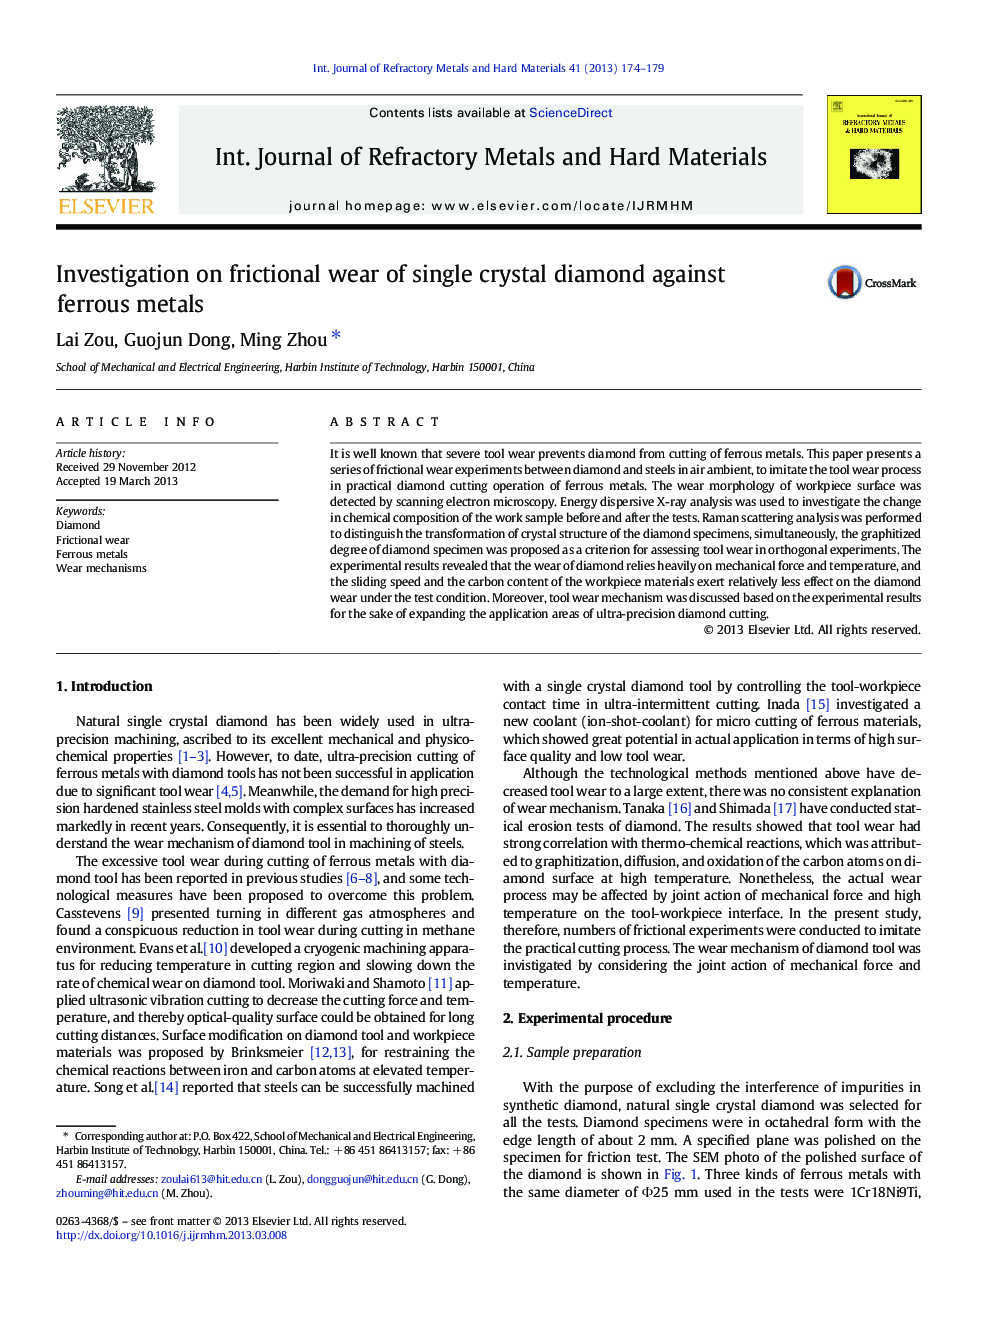 Investigation on frictional wear of single crystal diamond against ferrous metals